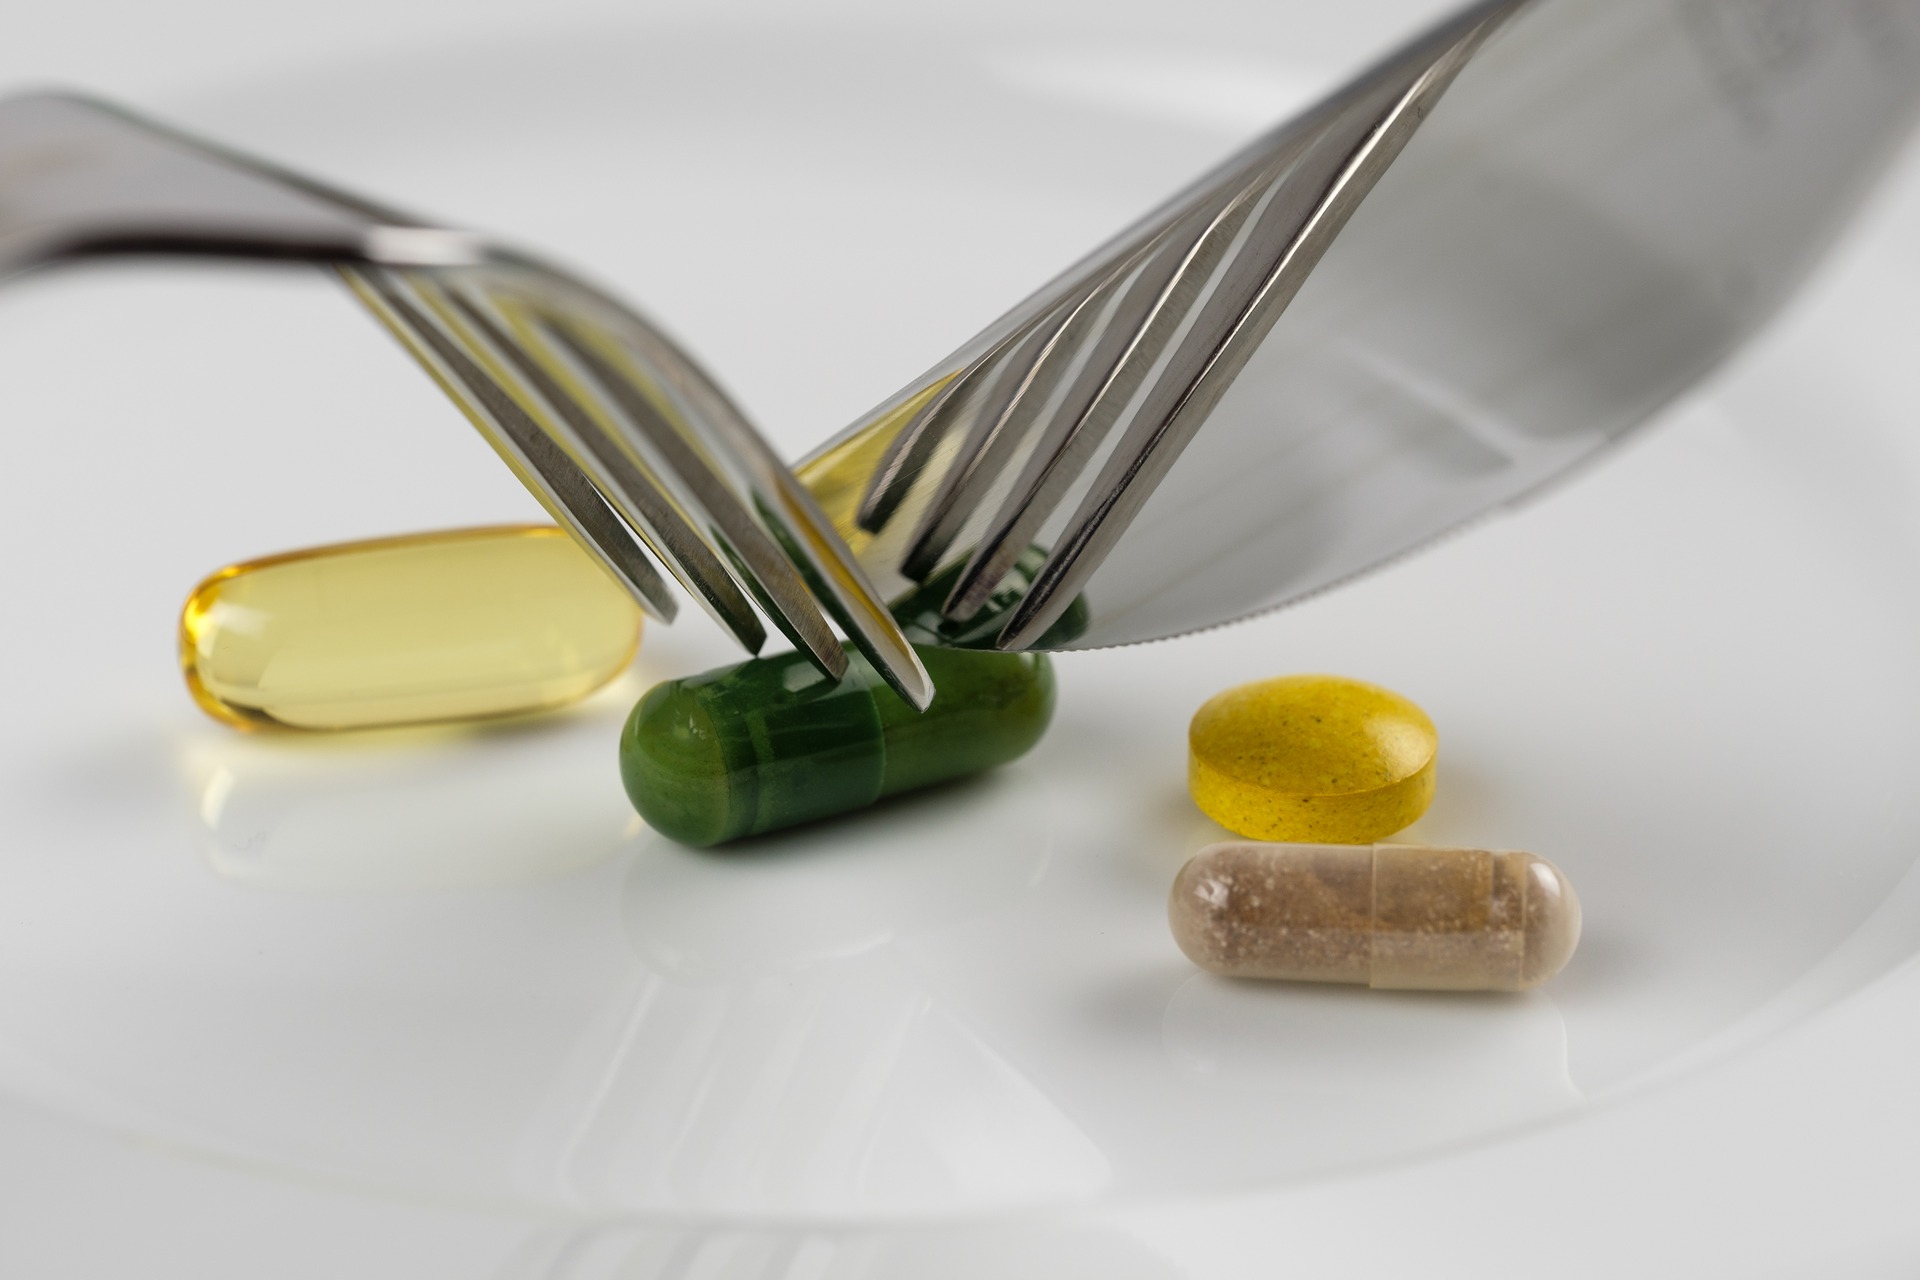 supplements on plate